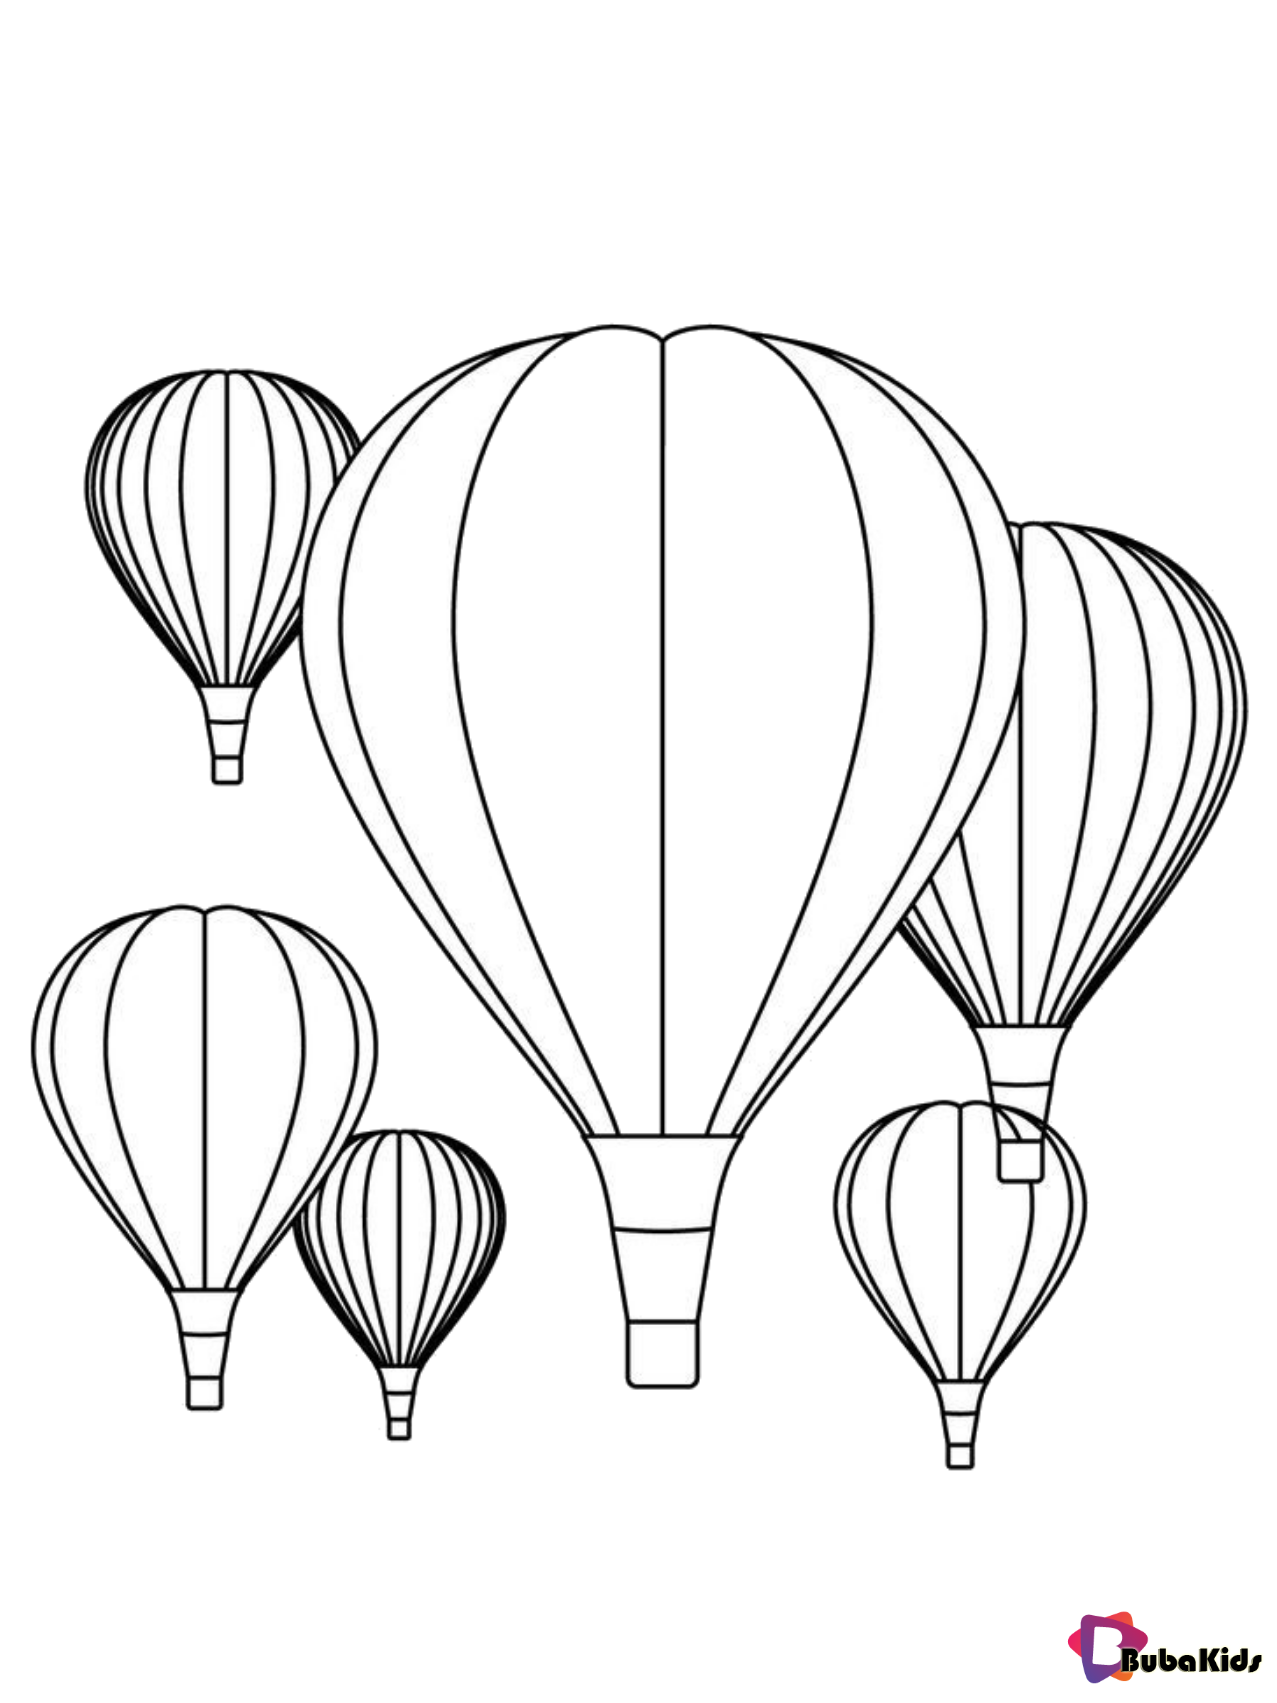 Hot air balloon coloring page for kids